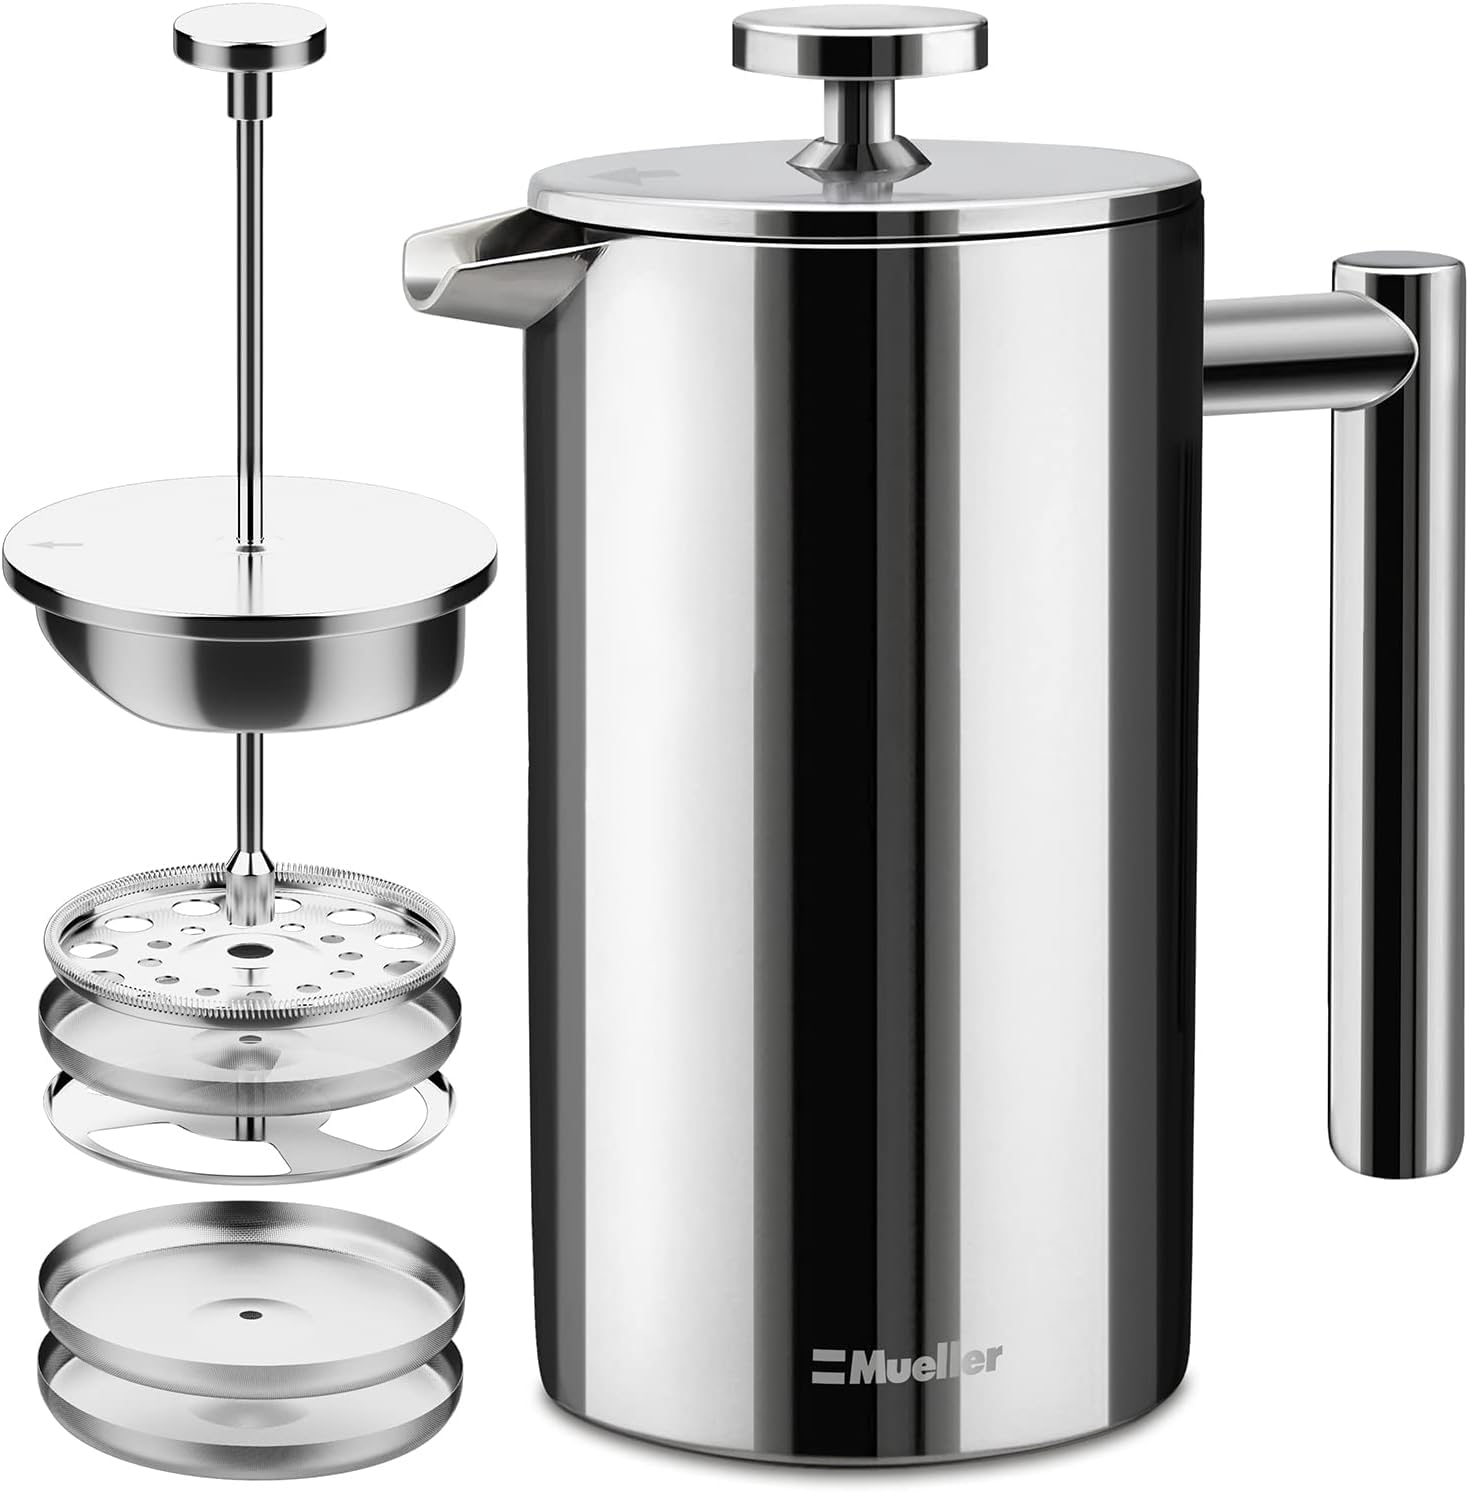 MuellerLiving French Press Coffee Maker